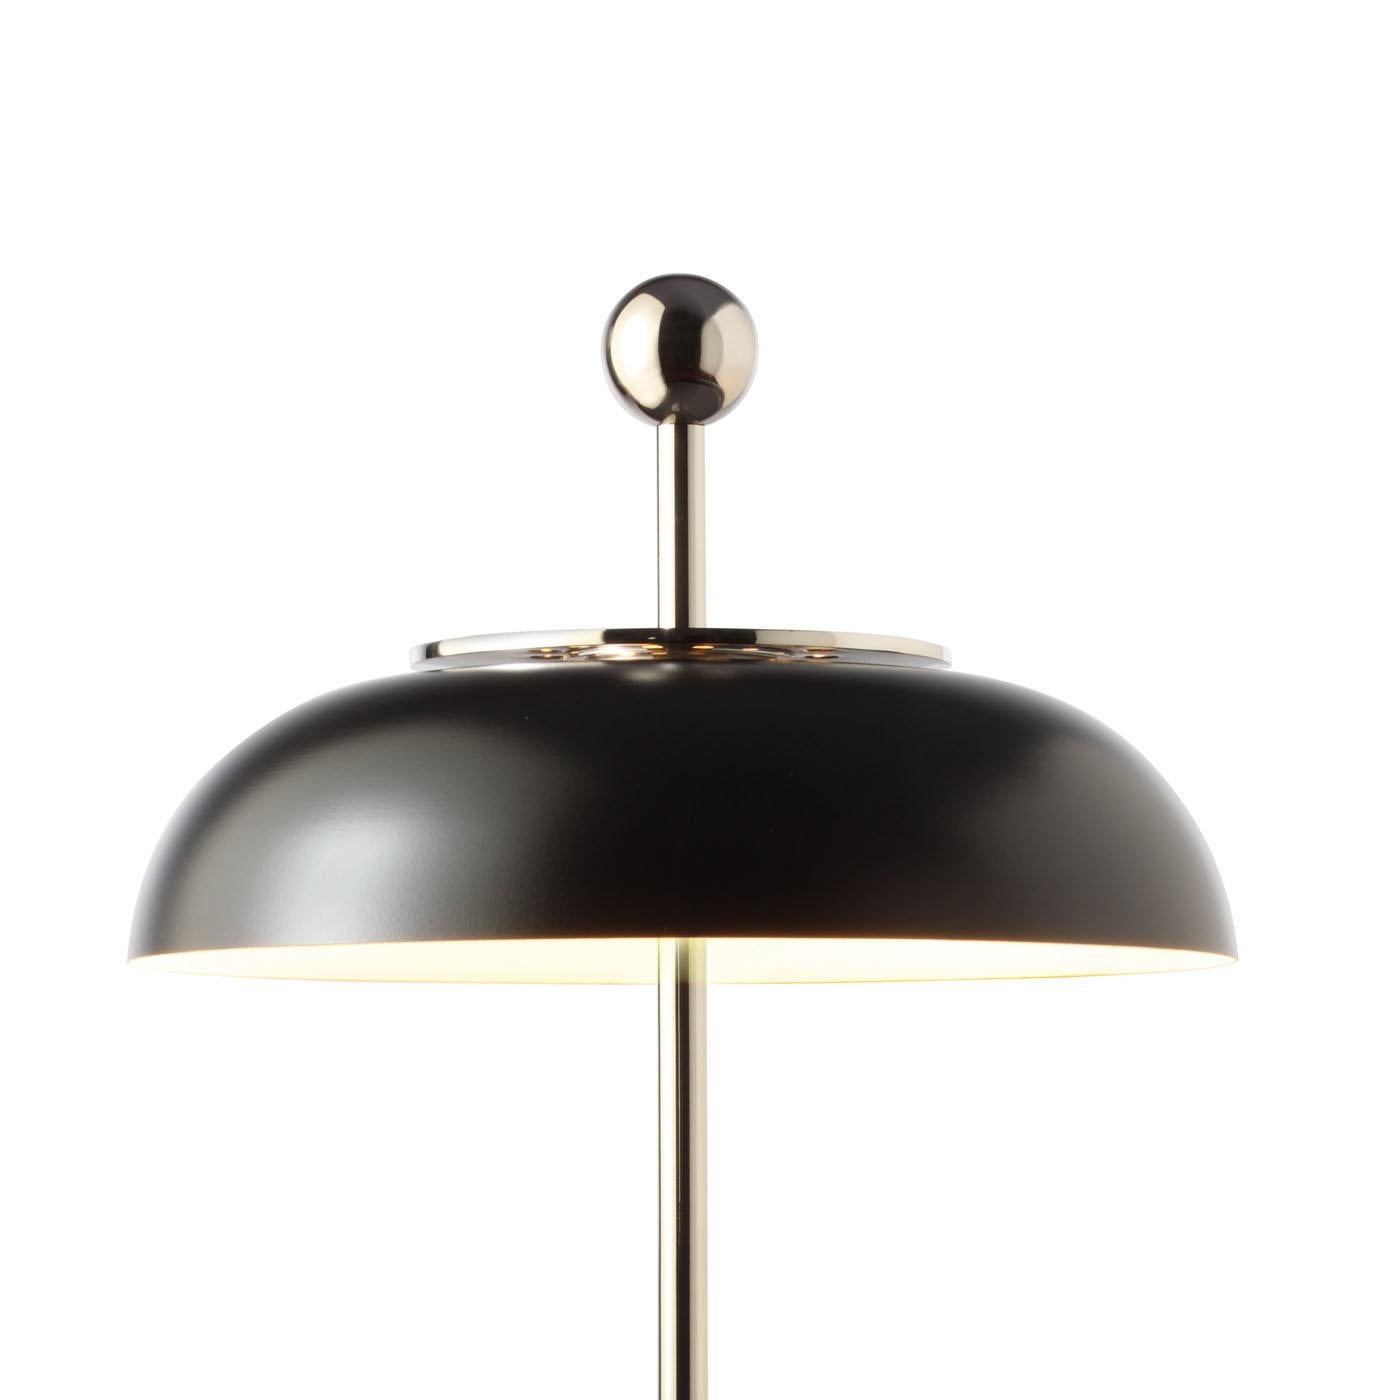 The structure of this elegant desk lamp is made entirely in metal and consists of a round base and a shaft that runs vertically and continues over the shade ending in a round top. The shade, a sophisticated semi-spherical metal element facing